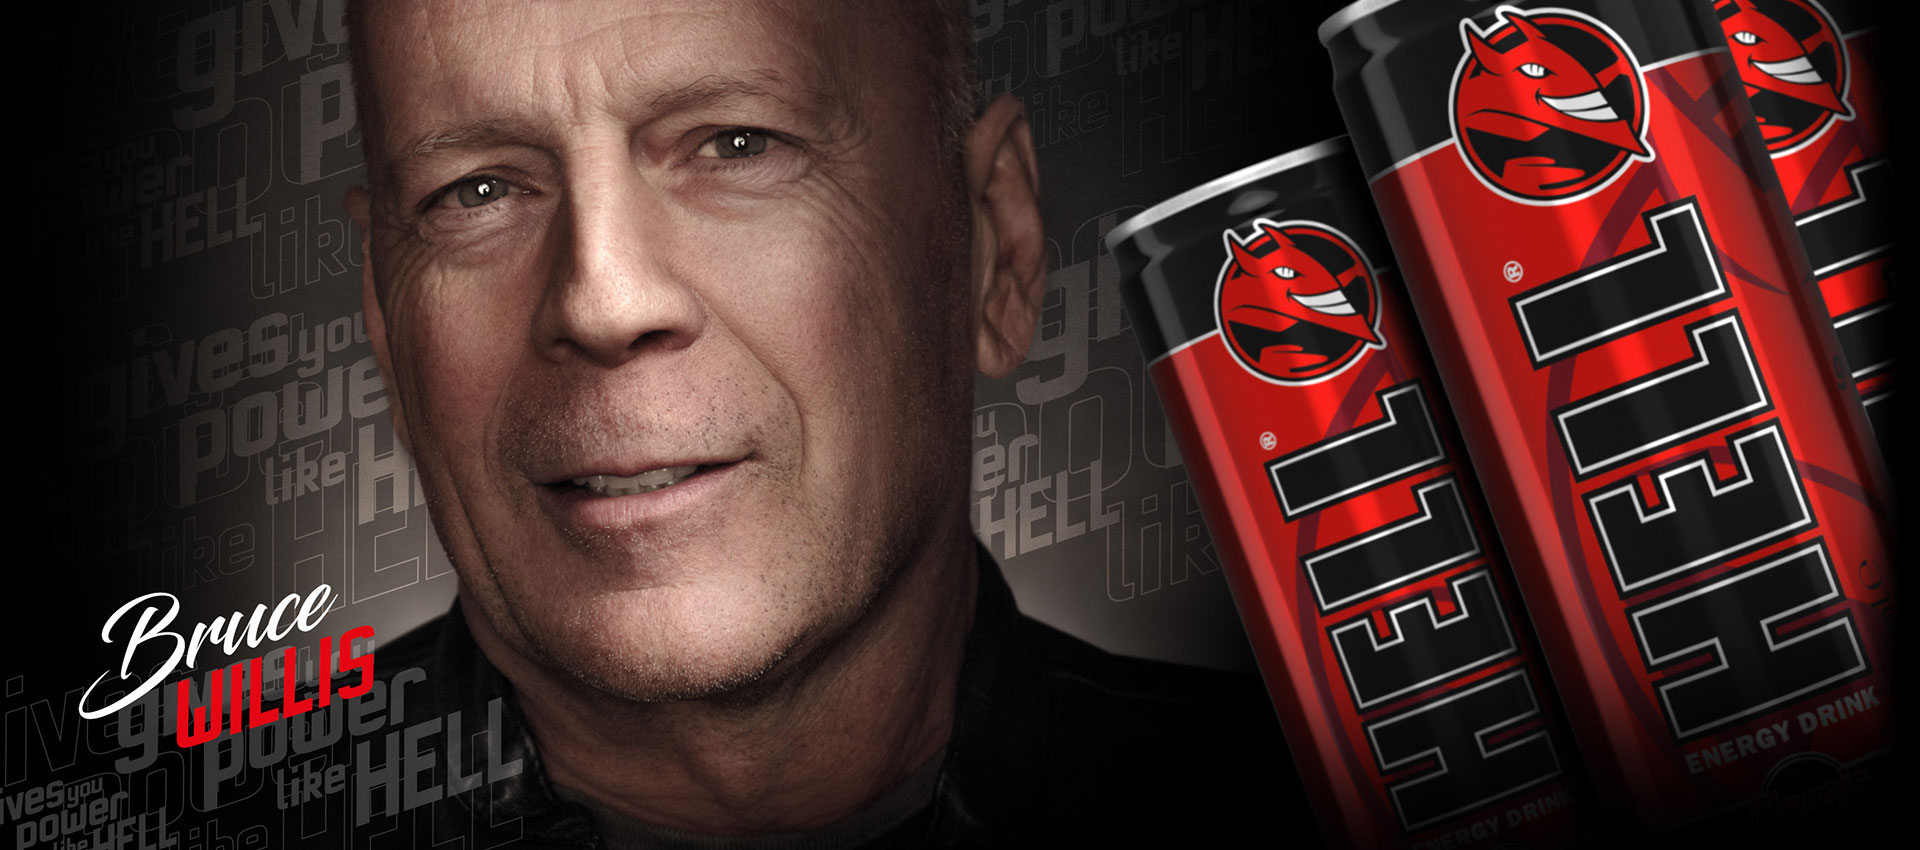 Boosting the buzz for Hell Energy with Bruce Willis